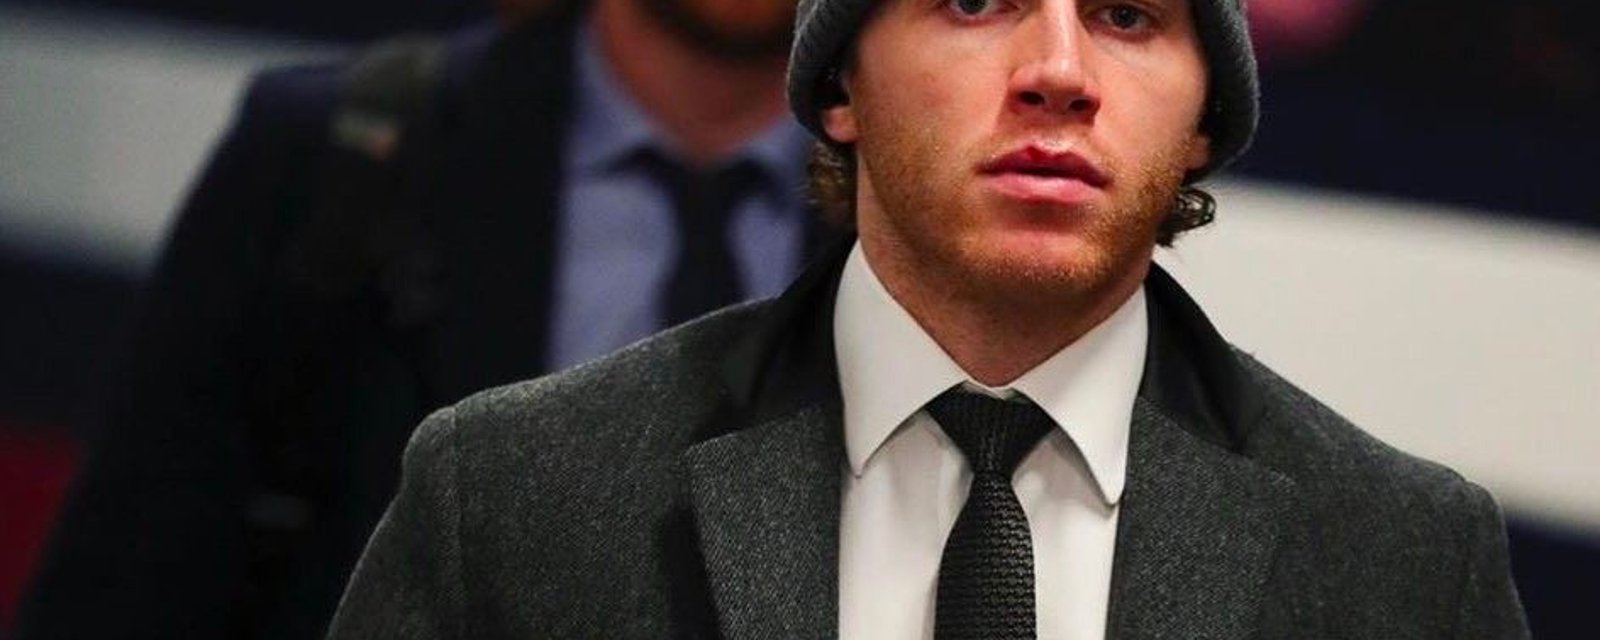 New scenario emerges for Patrick Kane with latest update